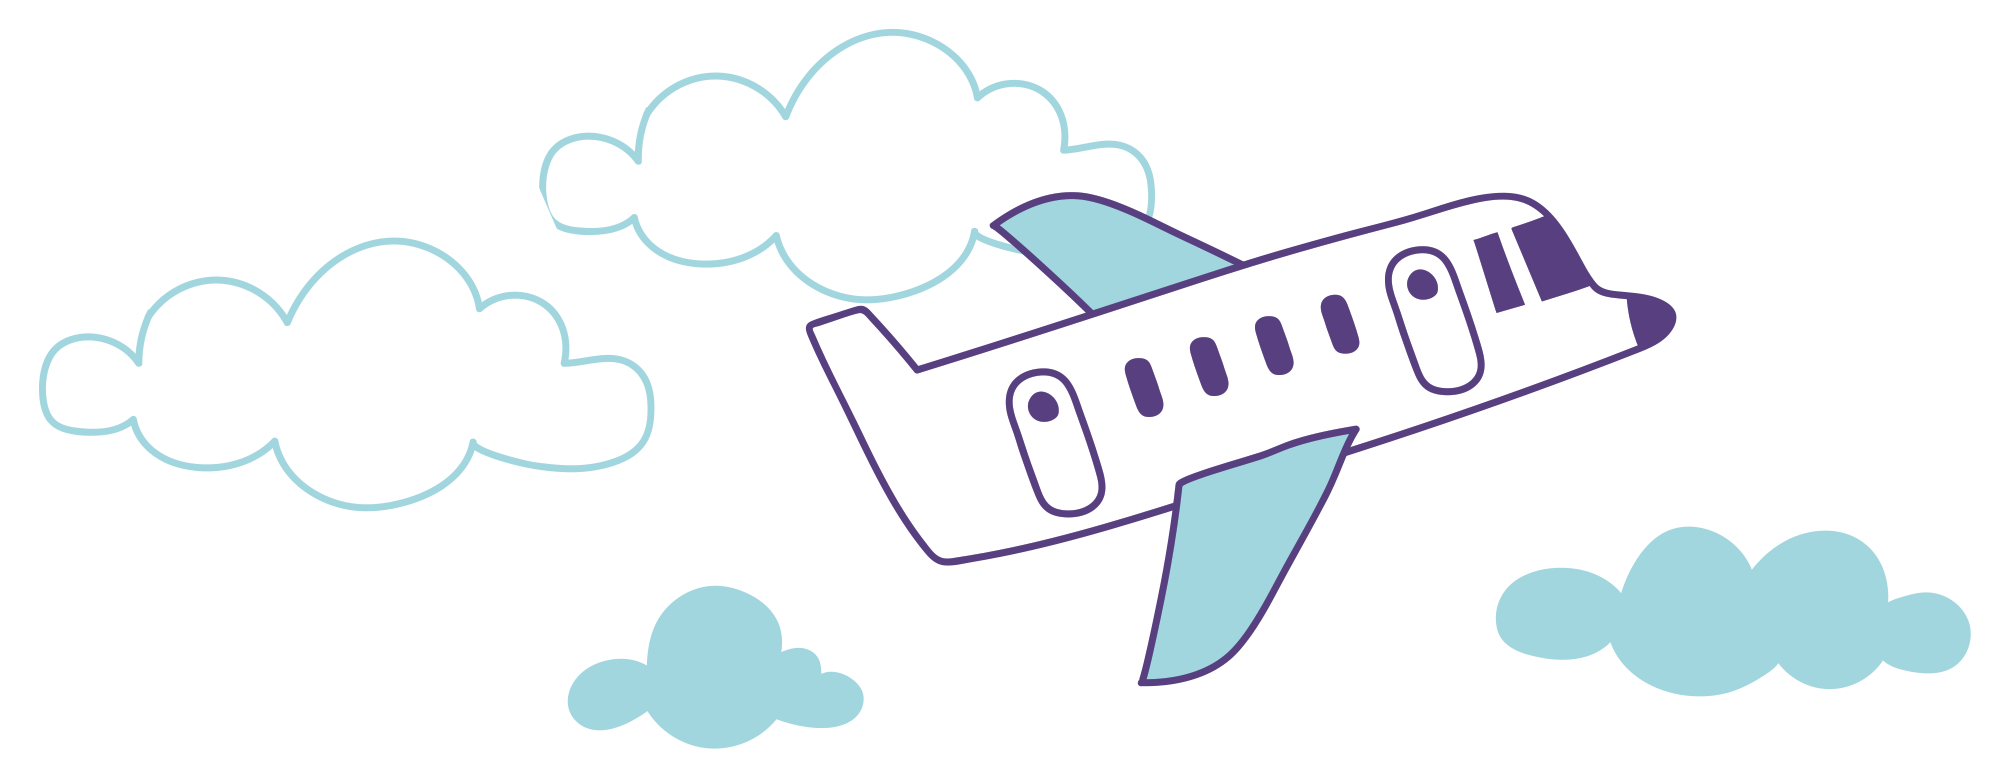 Plane flying through clouds illustration